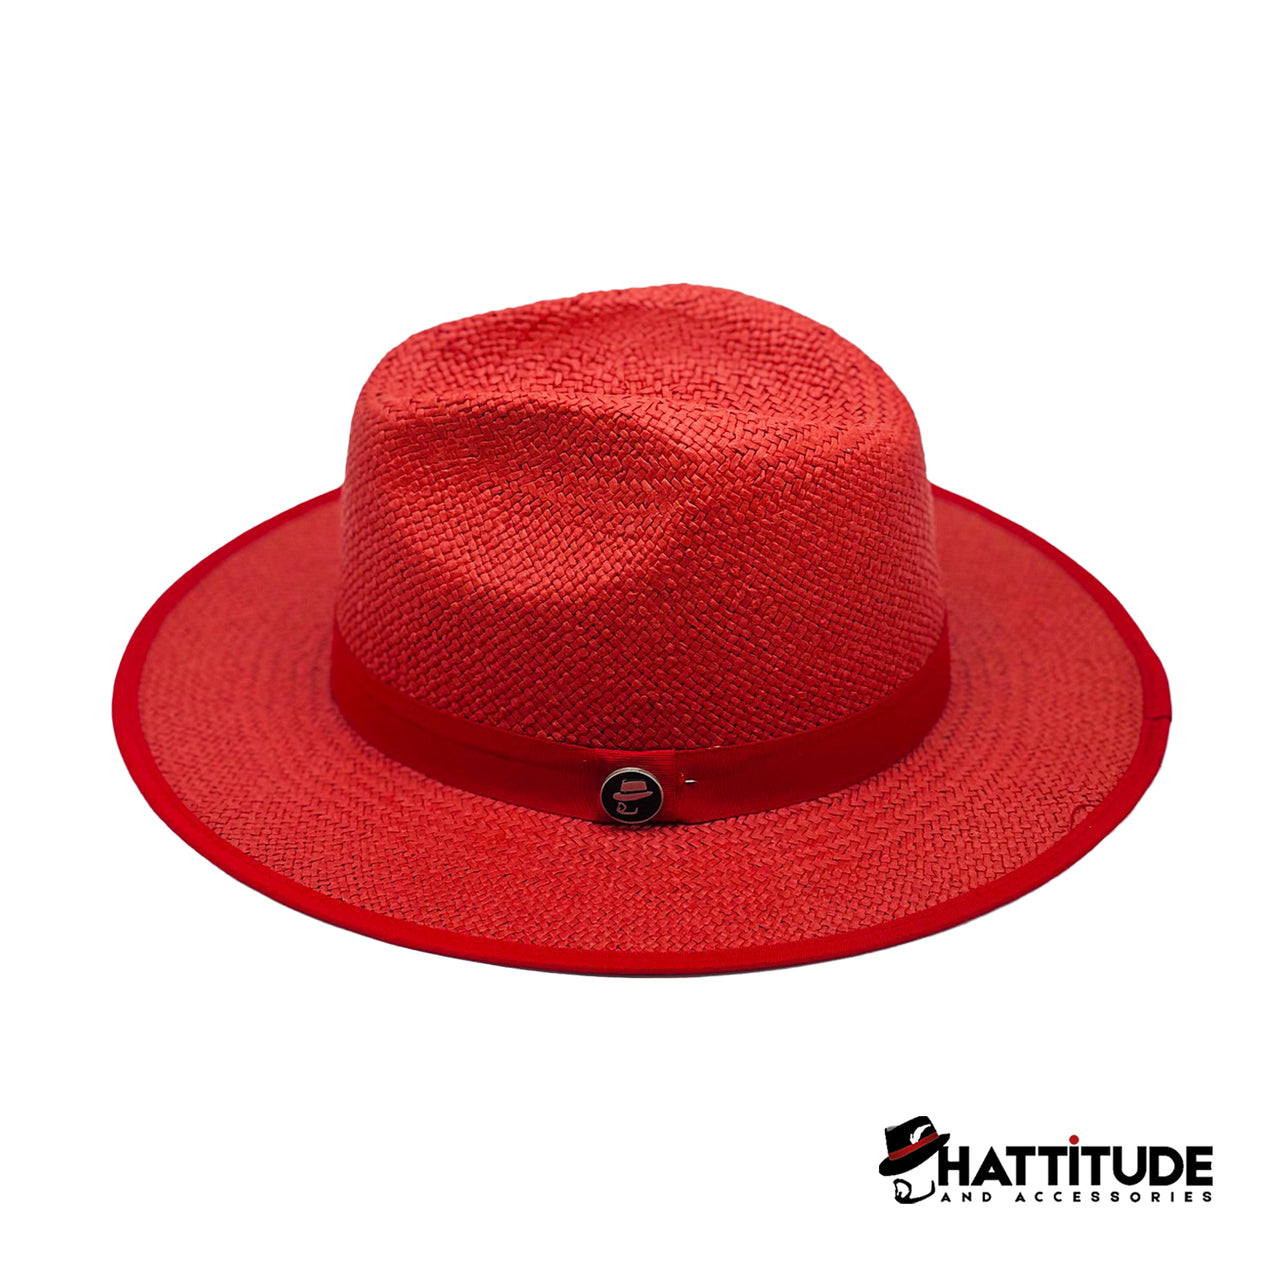 Kingdom Collection Red/Blue - Hattitude